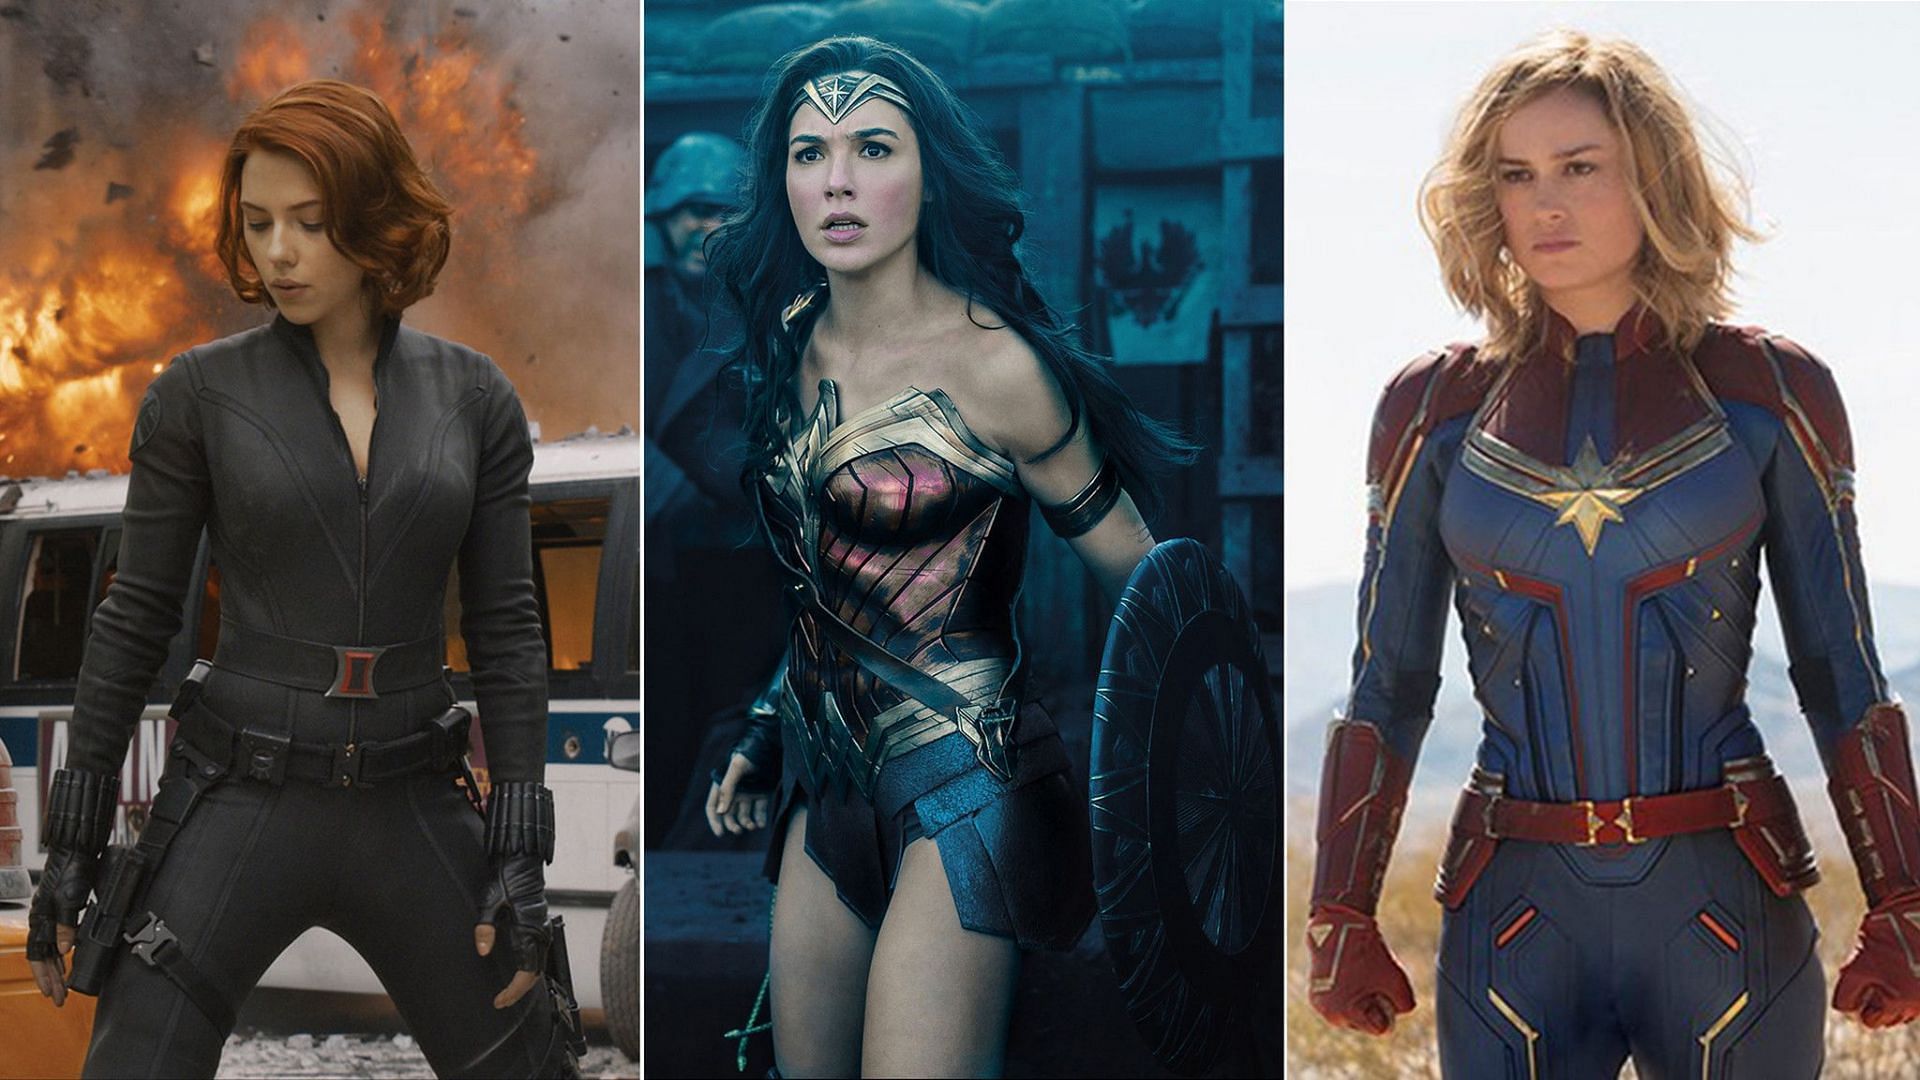 female action heroes